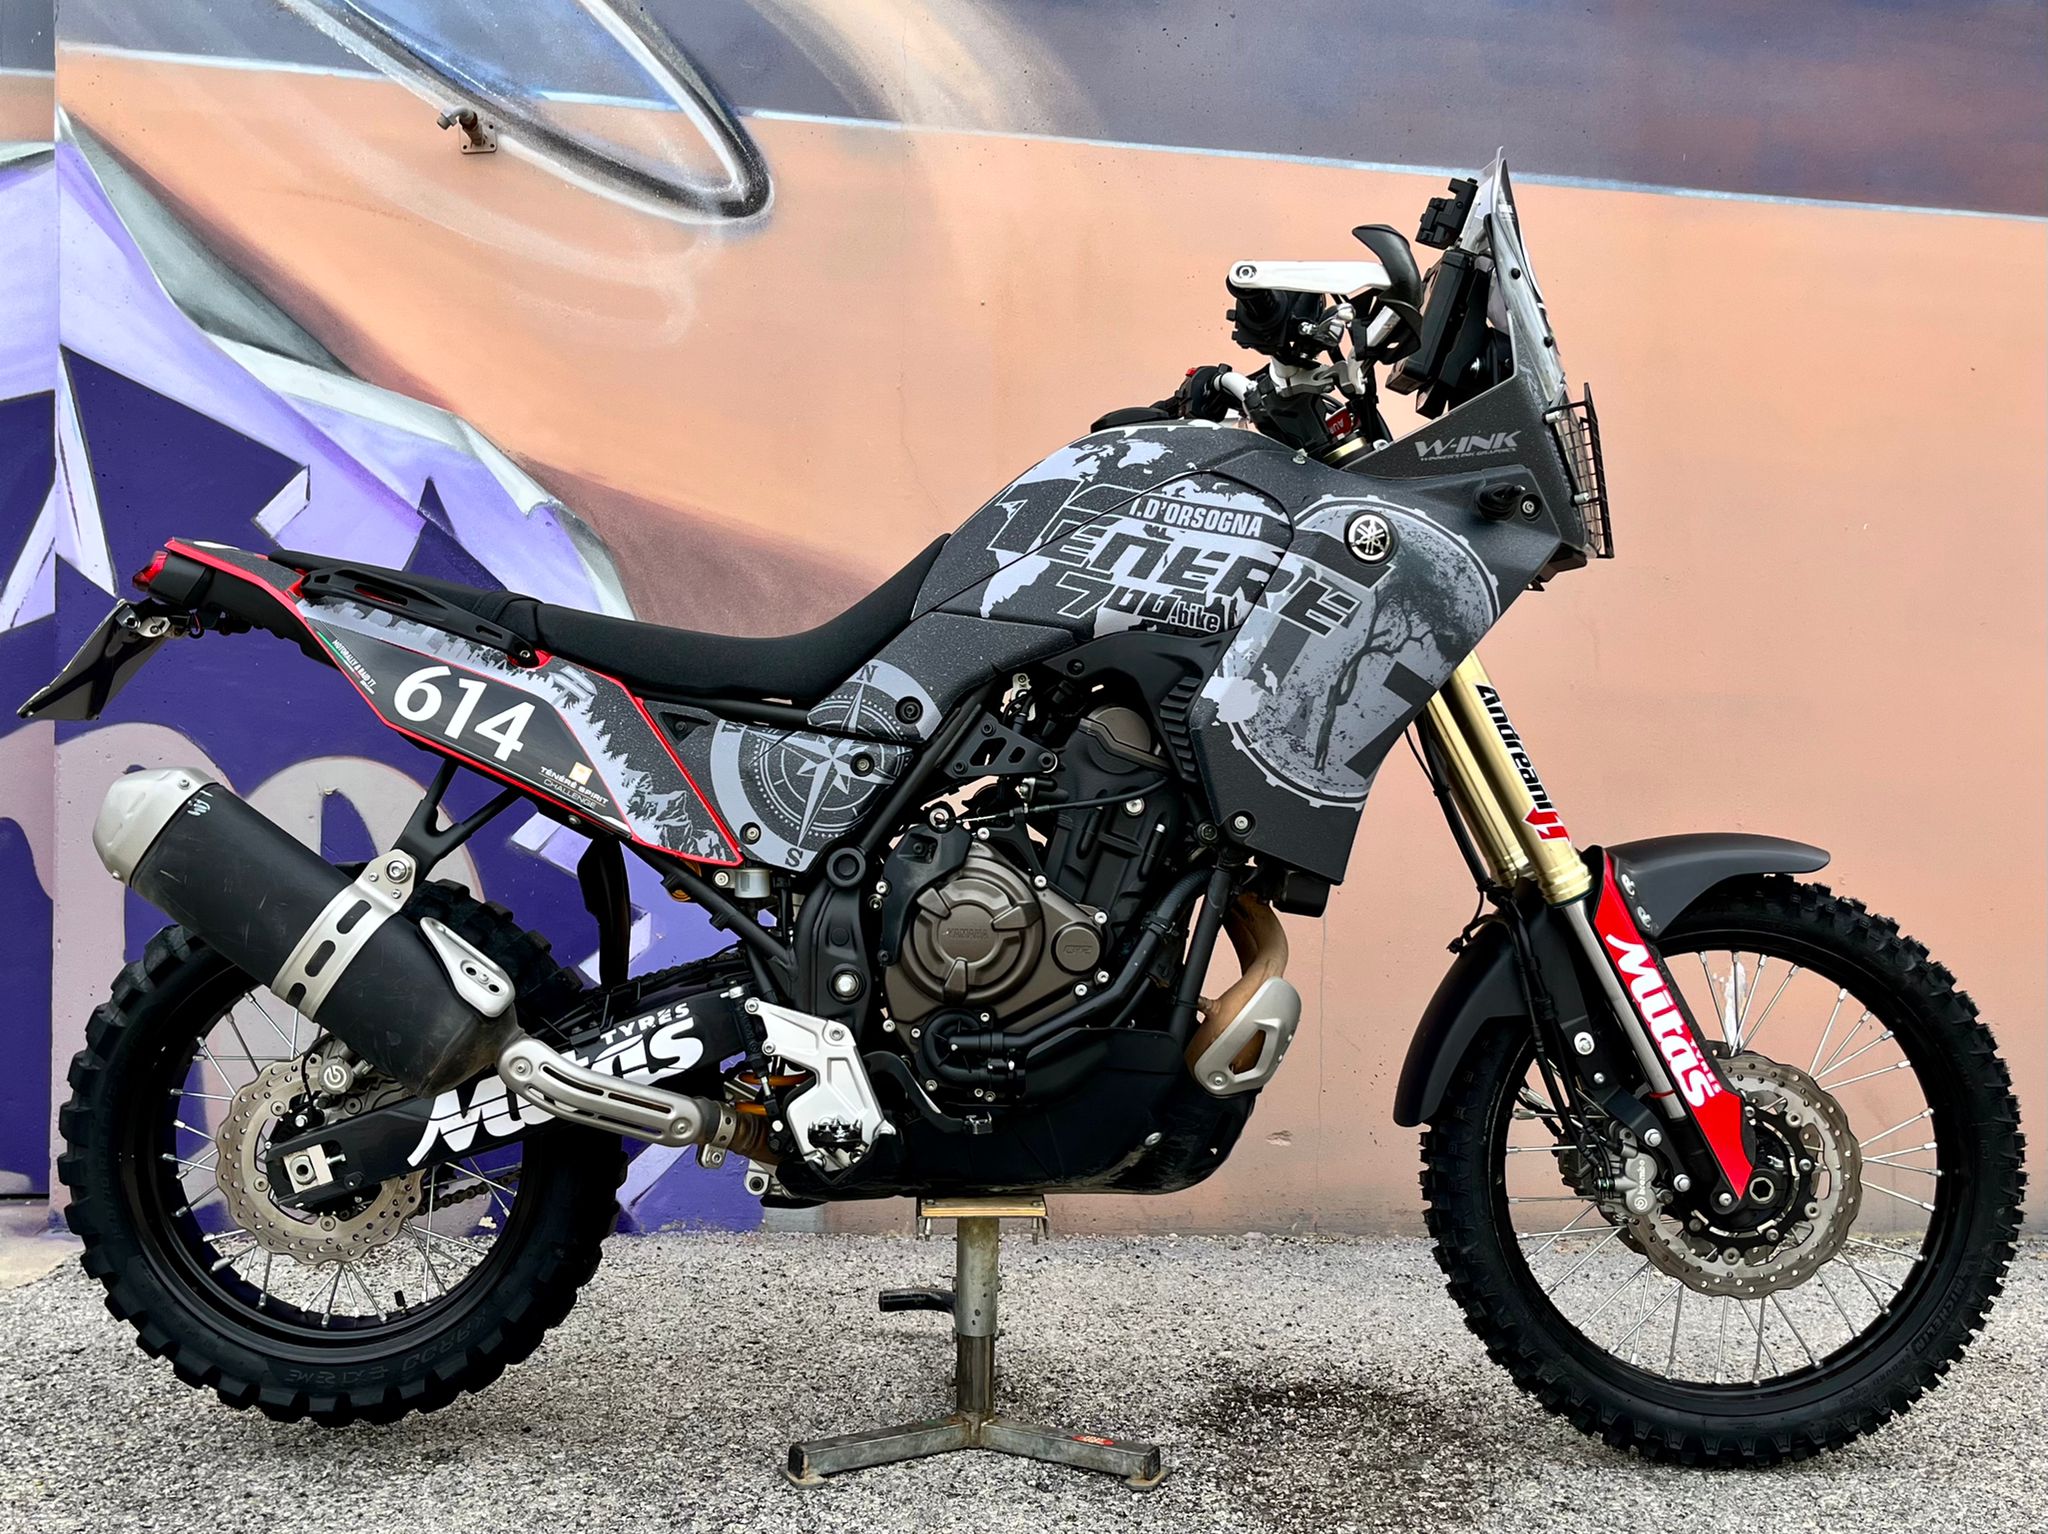 Customized Design for our Tenere 700 – by W-Ink Graphics